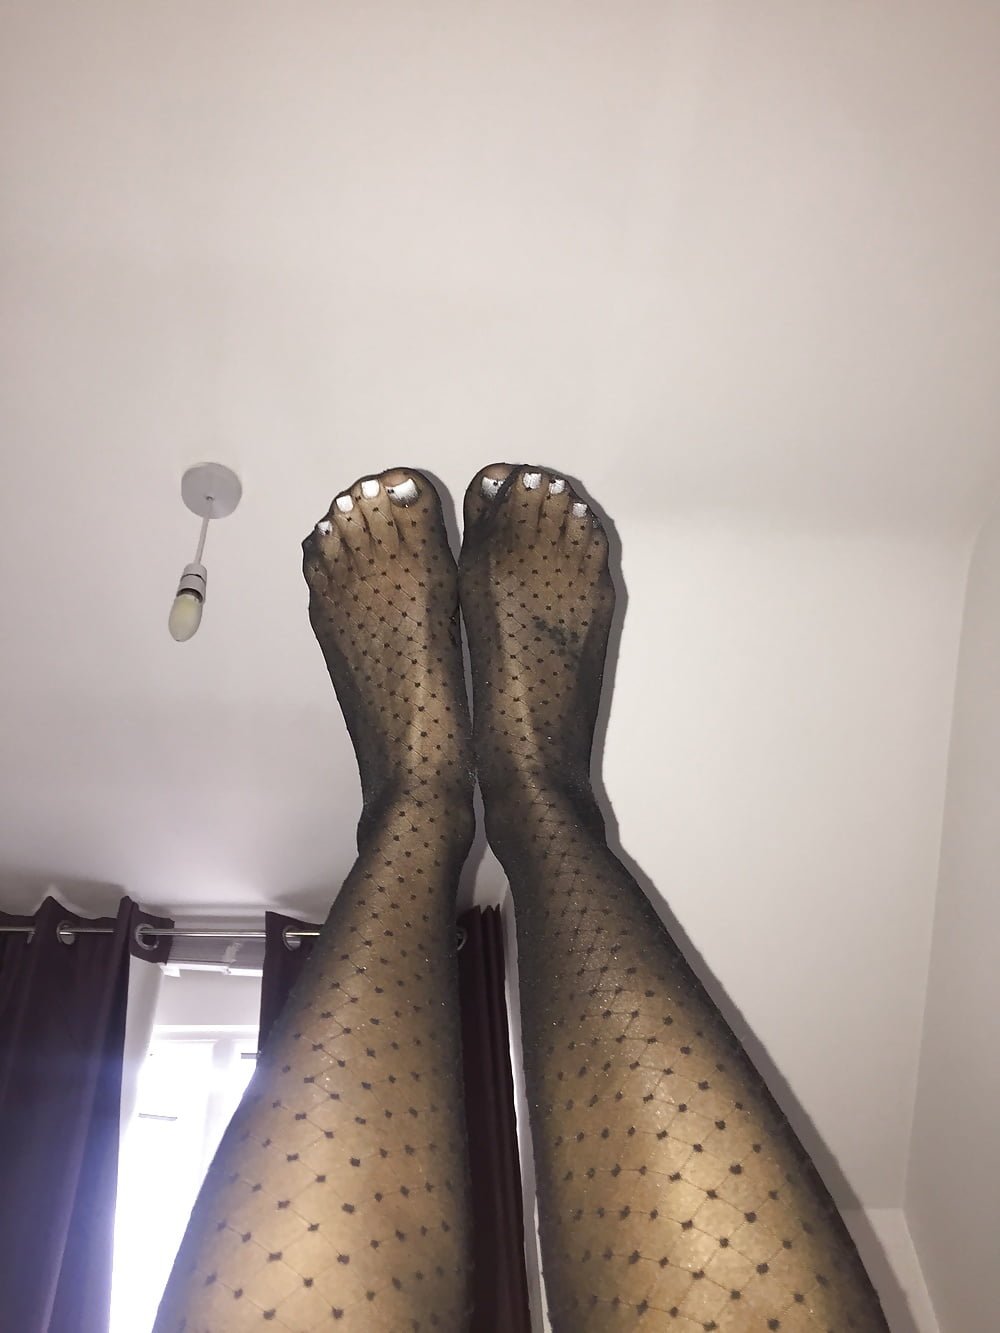 Lucy s_beautiful_legs_and_feet_in_polka_dot_stockings (5/11)